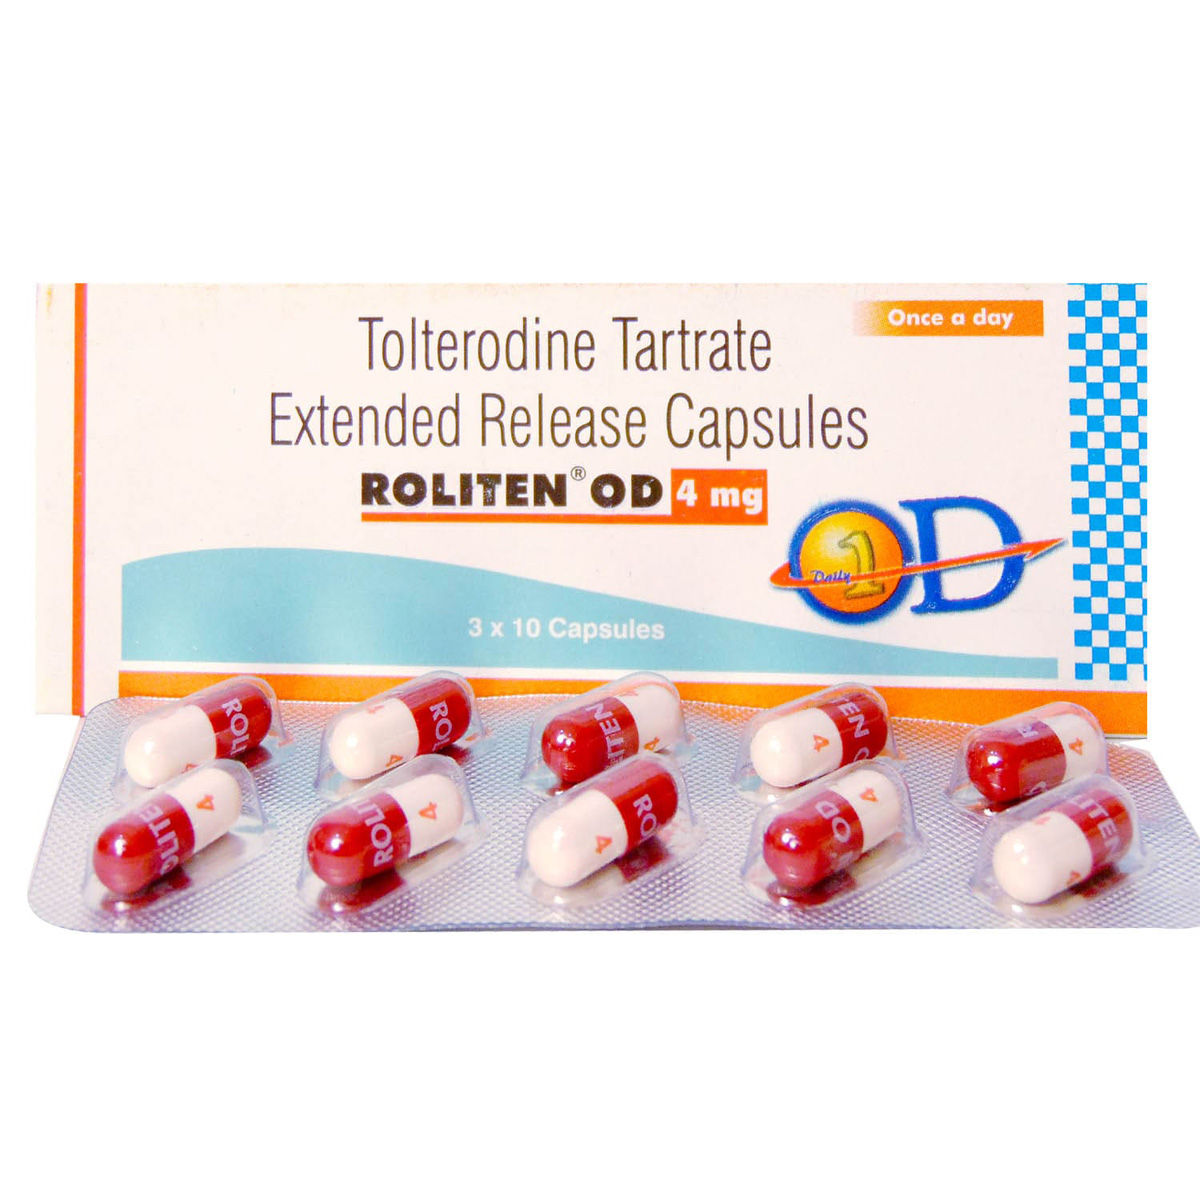 Roliten OD 4 mg Capsule 10's Price, Uses, Side Effects, Composition .